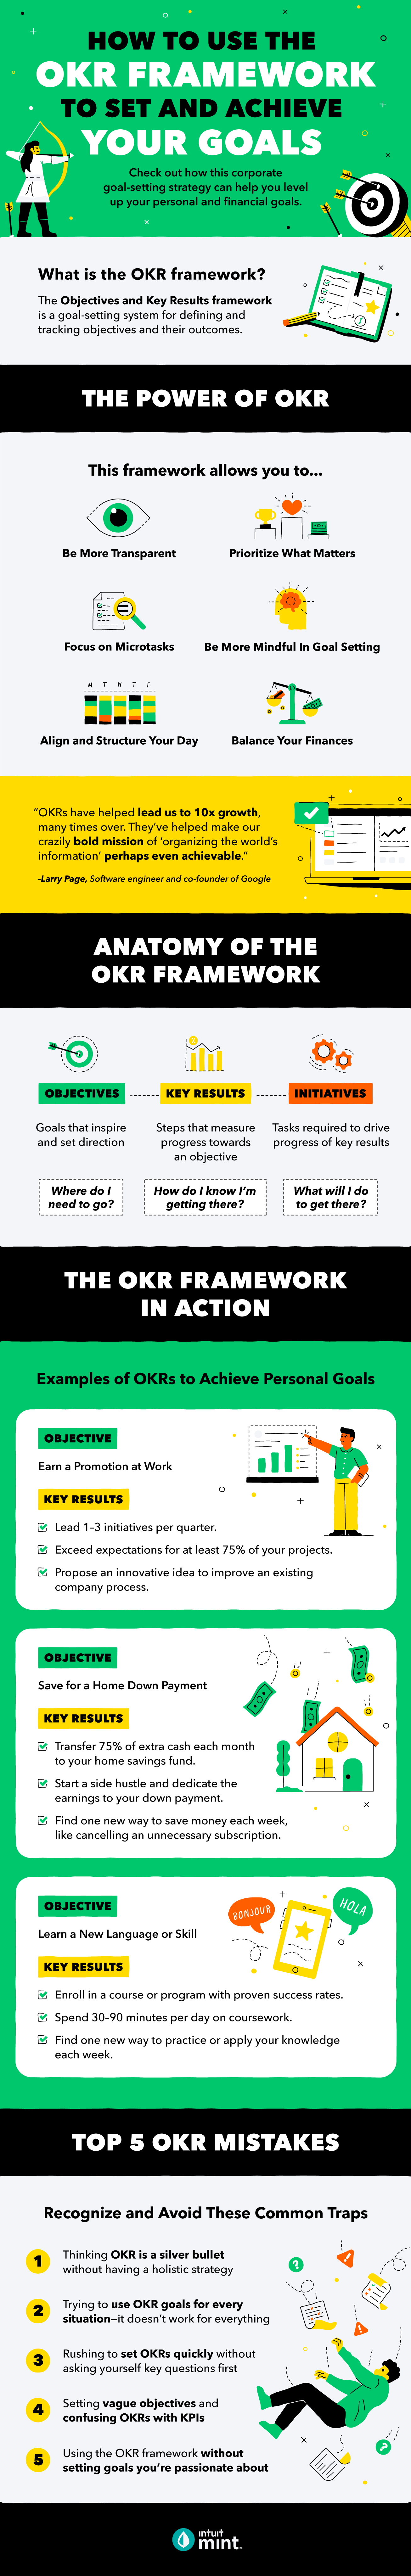 How to Use the OKR Framework to Reach Your Life Goals